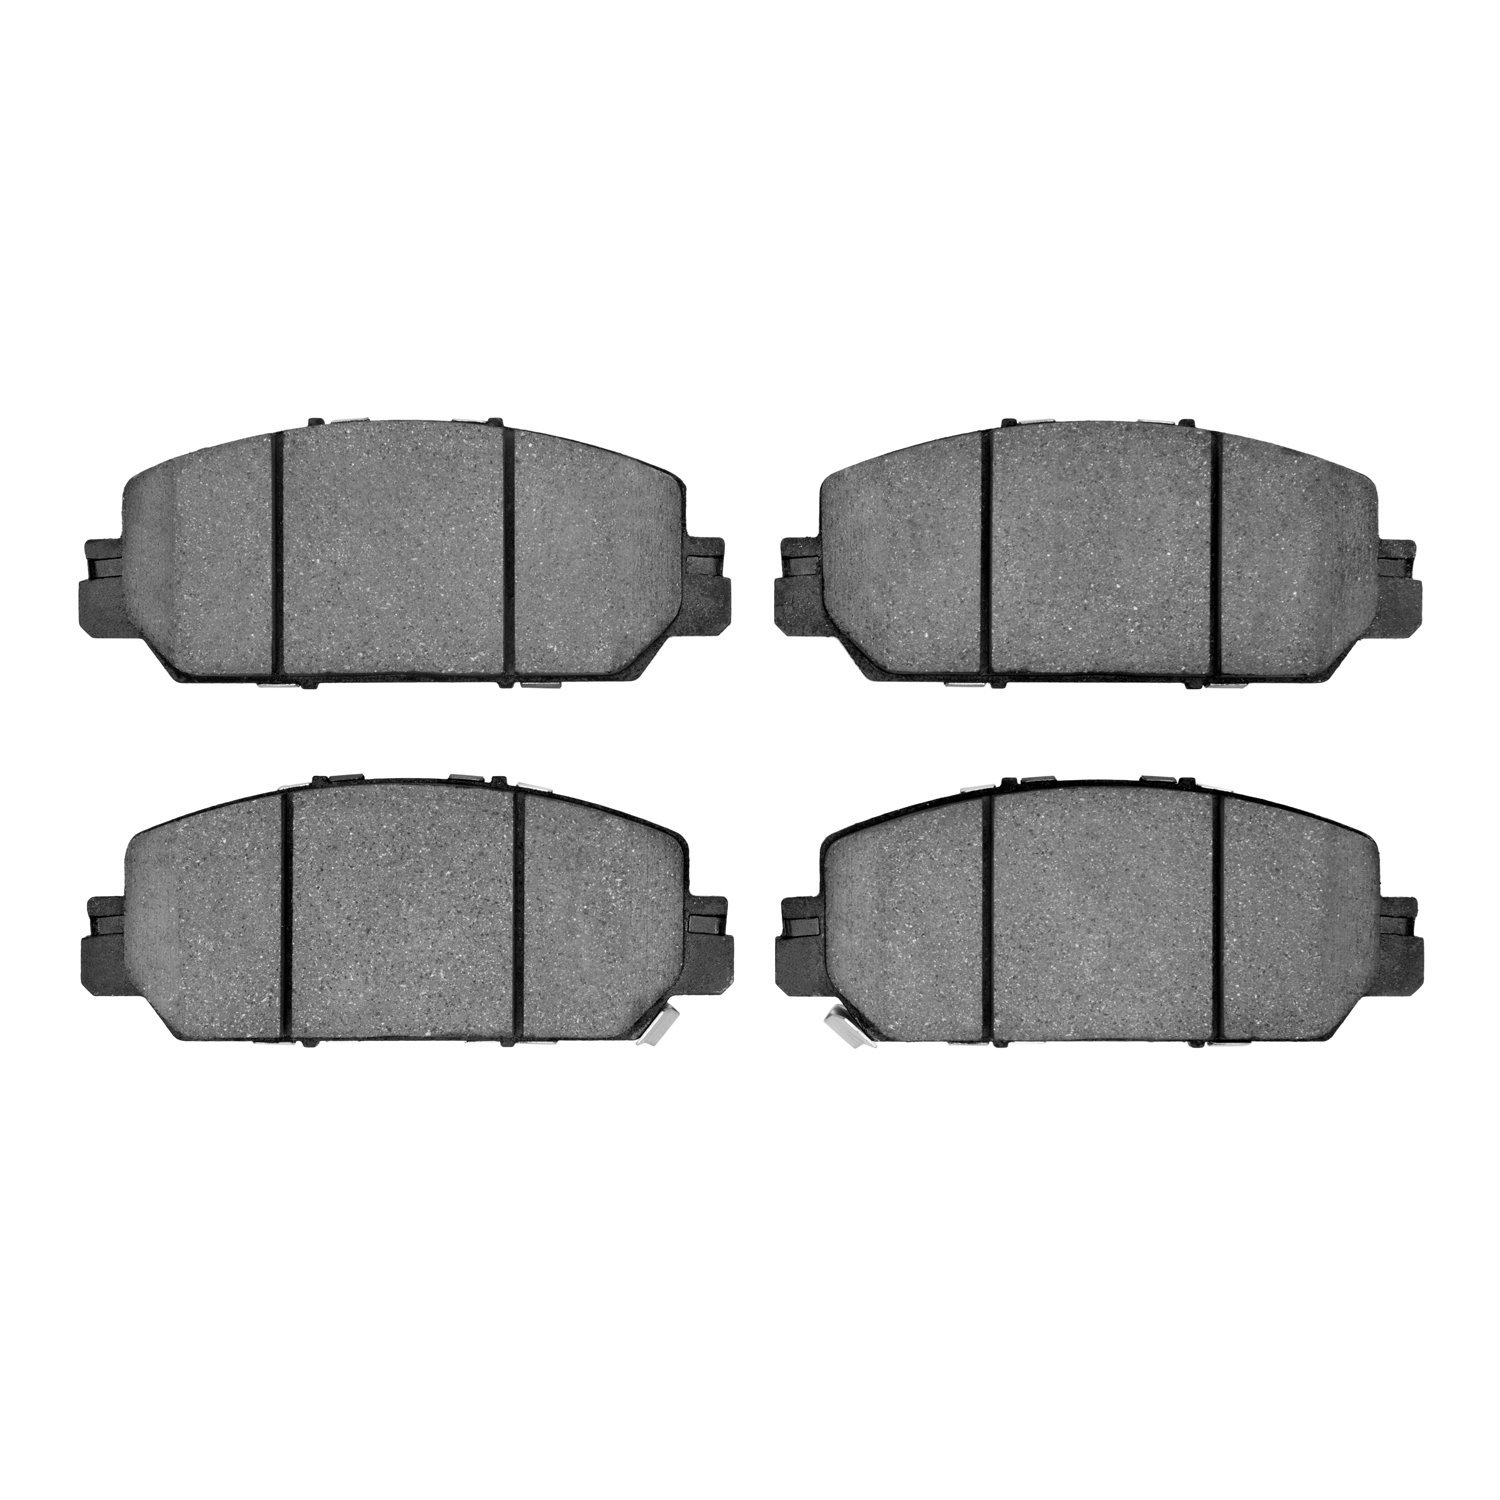 1310-2036-00 3000-Series Ceramic Brake Pads, Fits Select Acura/Honda, Position: Front